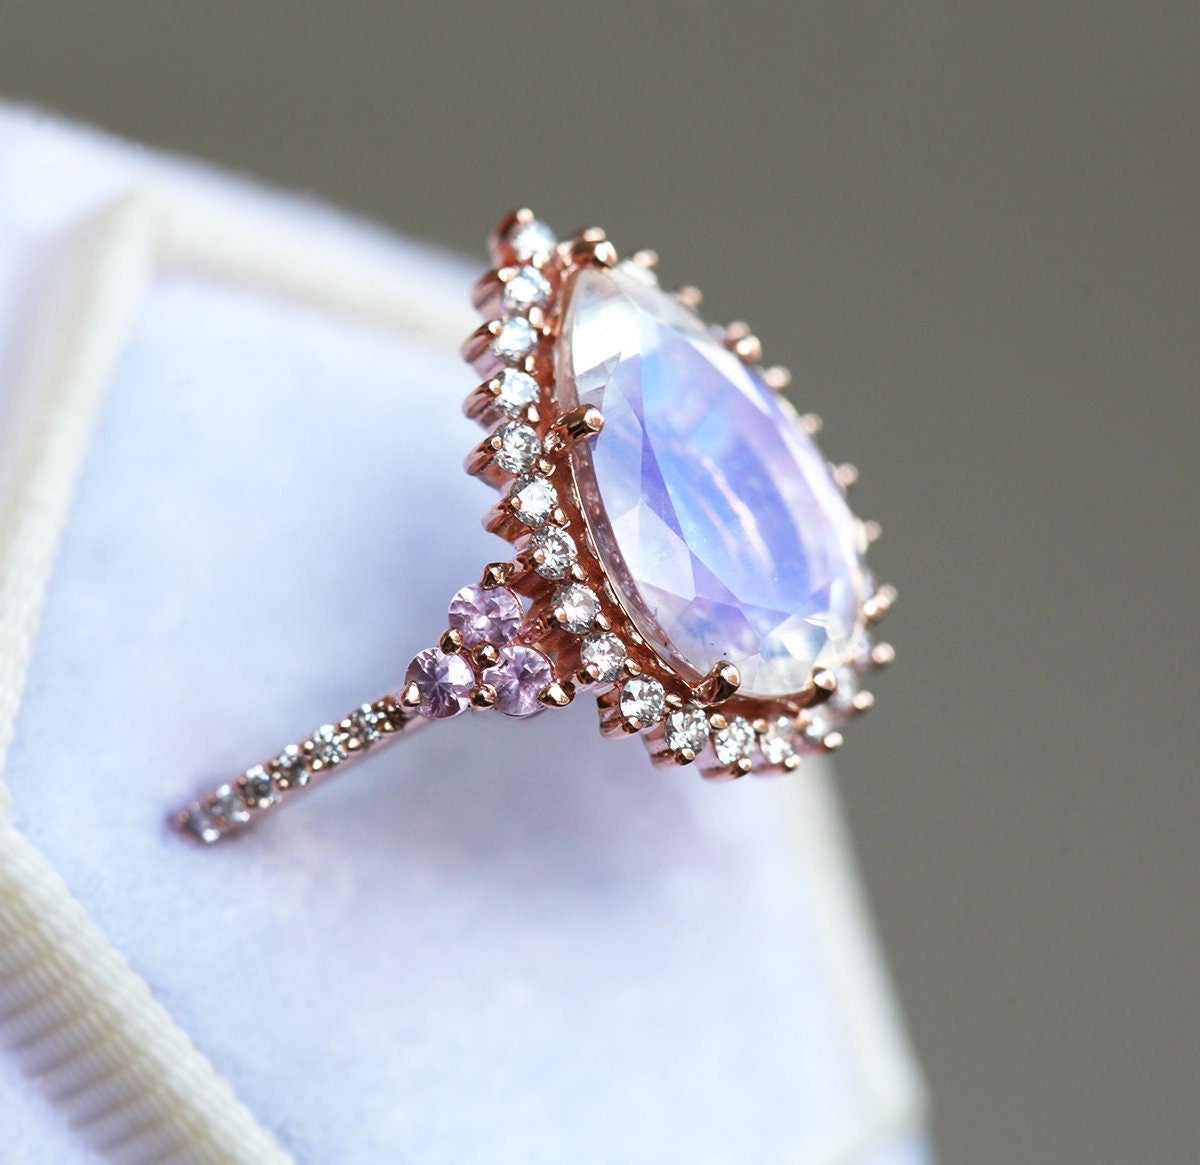 HALO PEAR MOONSTONE RING, ROSE GOLD MOONSTONE ENGAGEMENT RING, UNIQUE MOONSTONE RING - with 6ct moonstone